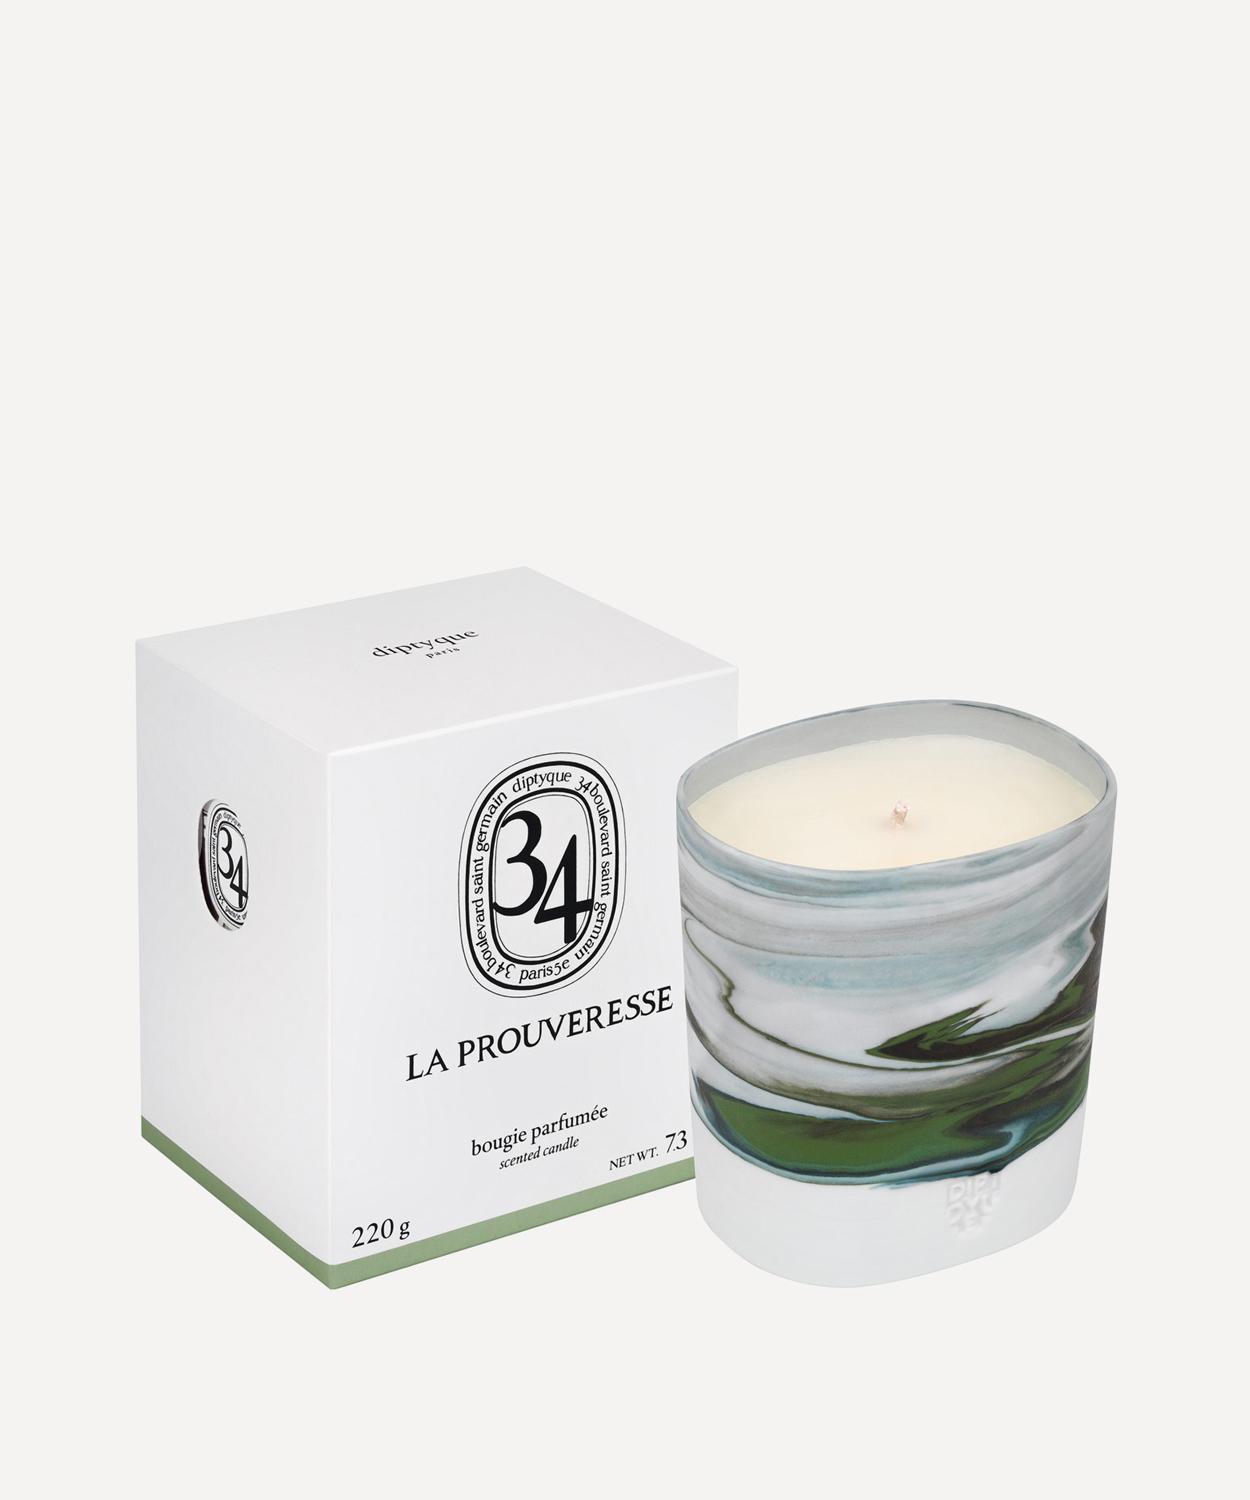 La Prouveresse Scented Candle 220g | Liberty London